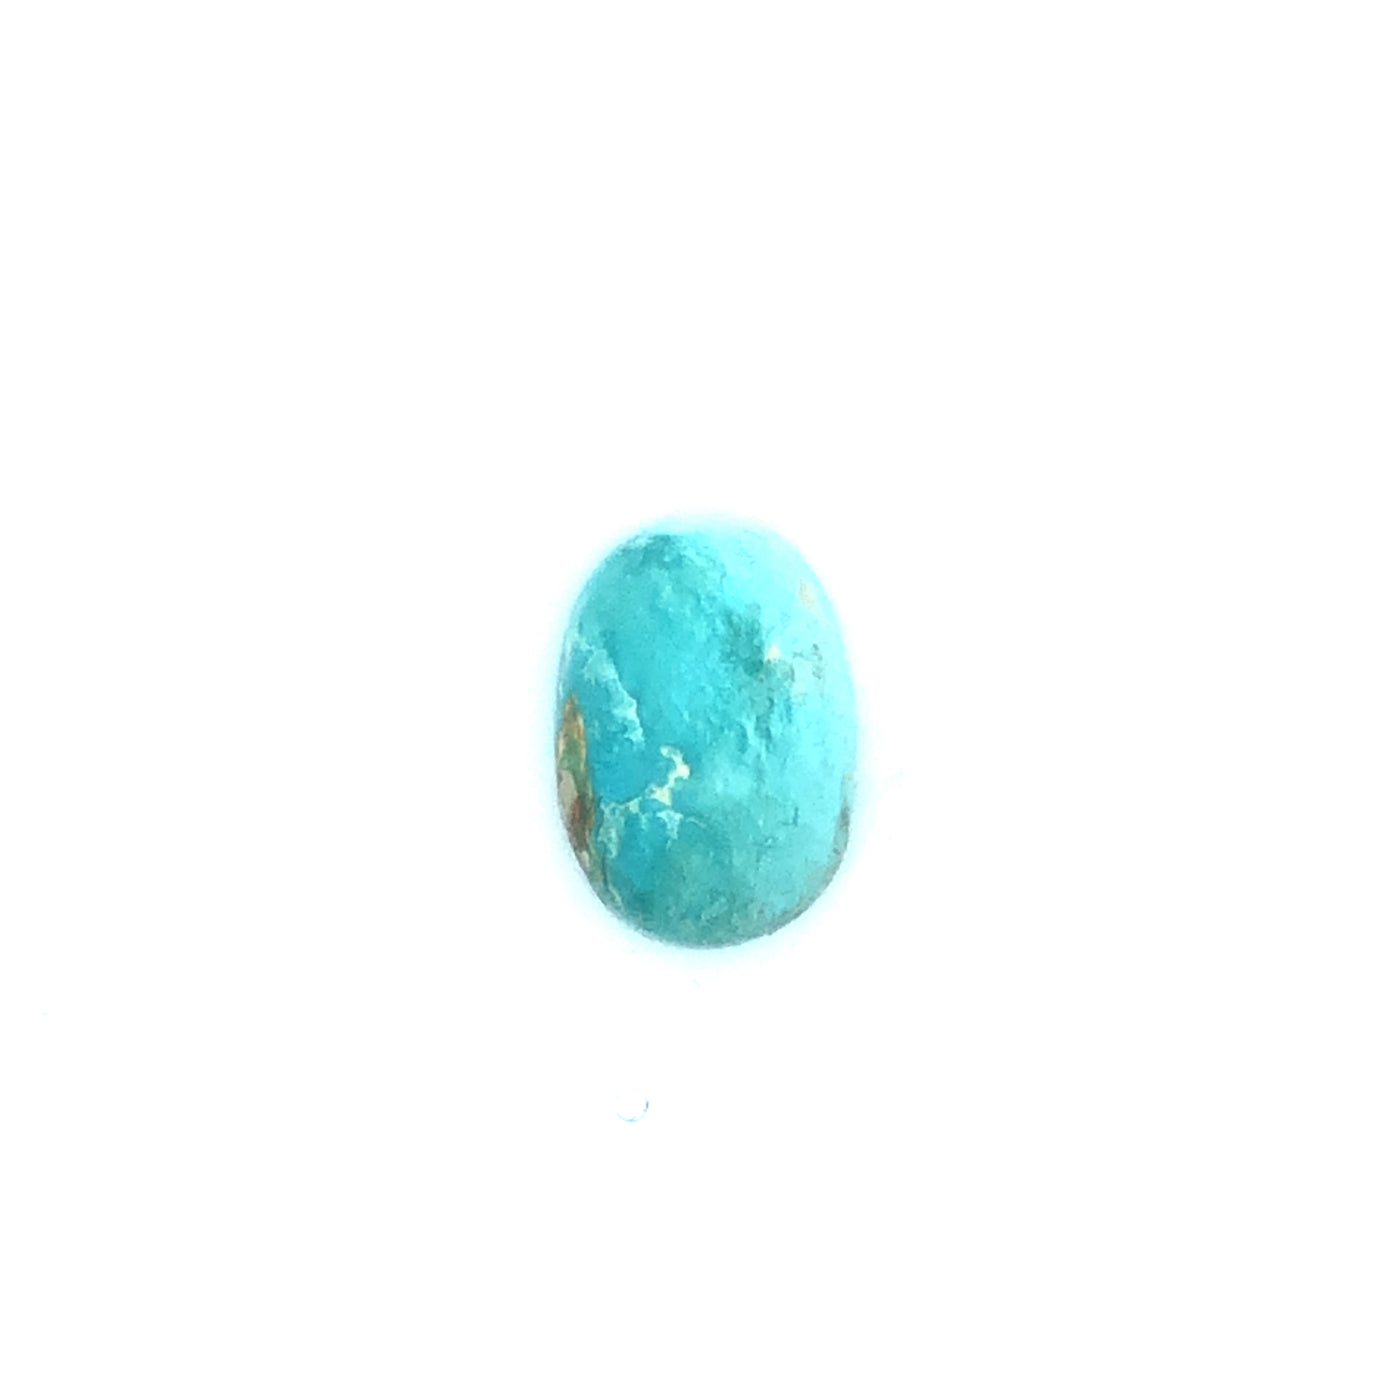 Loose Narooma Turquoise Oval Shaped 14.83Ct Blue With Some Brown